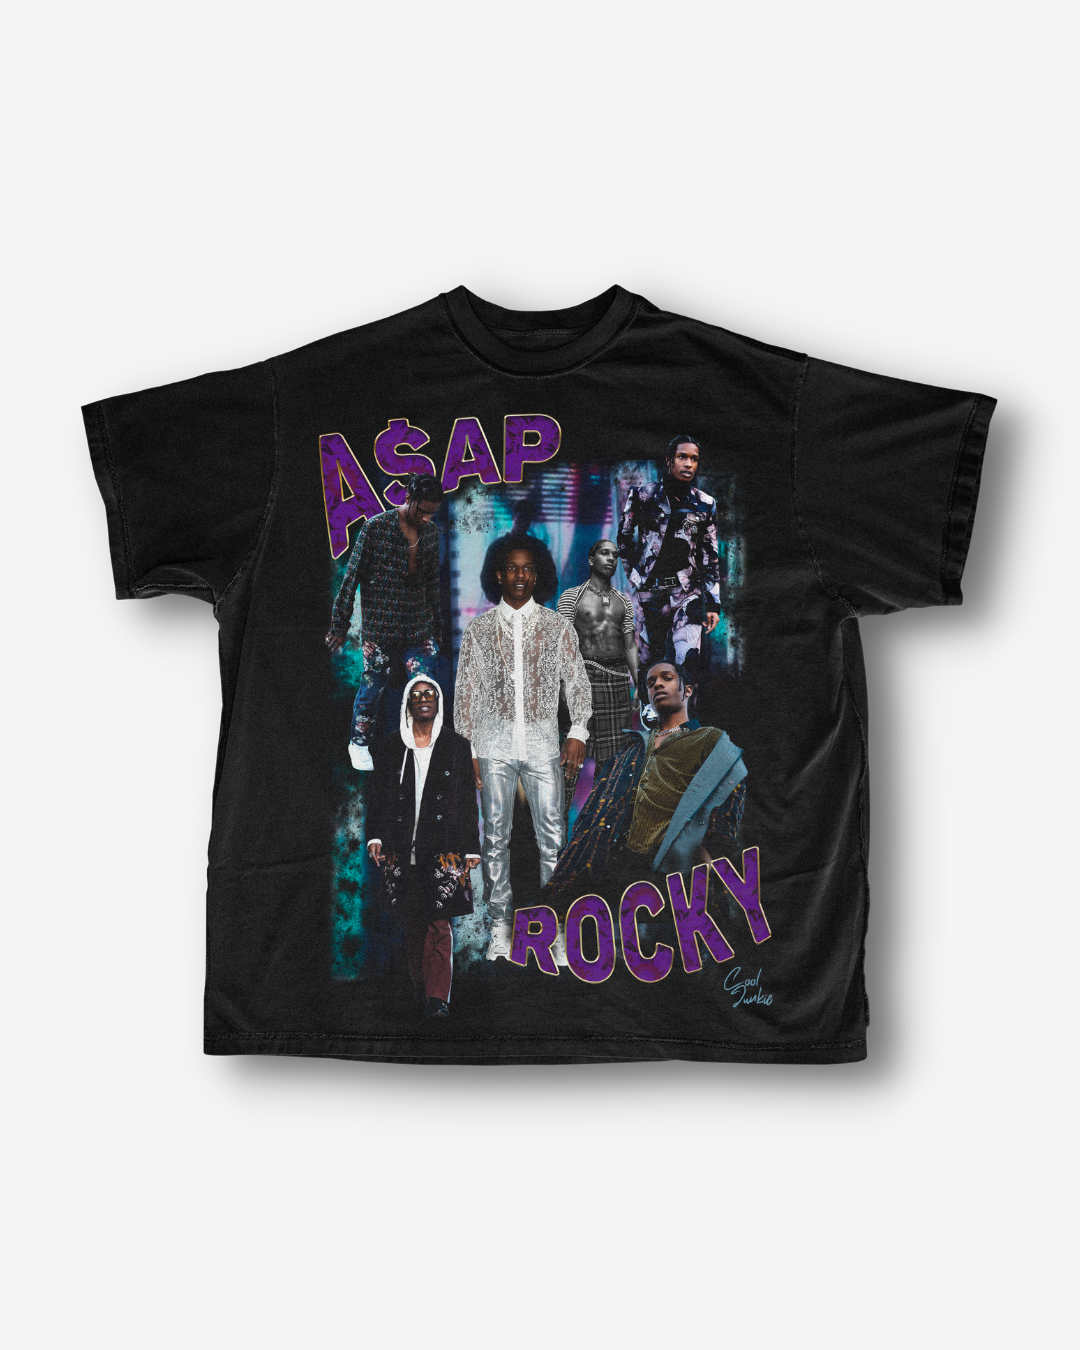 Black A$AP Rocky Tee with purple and blue as the main colors in the design